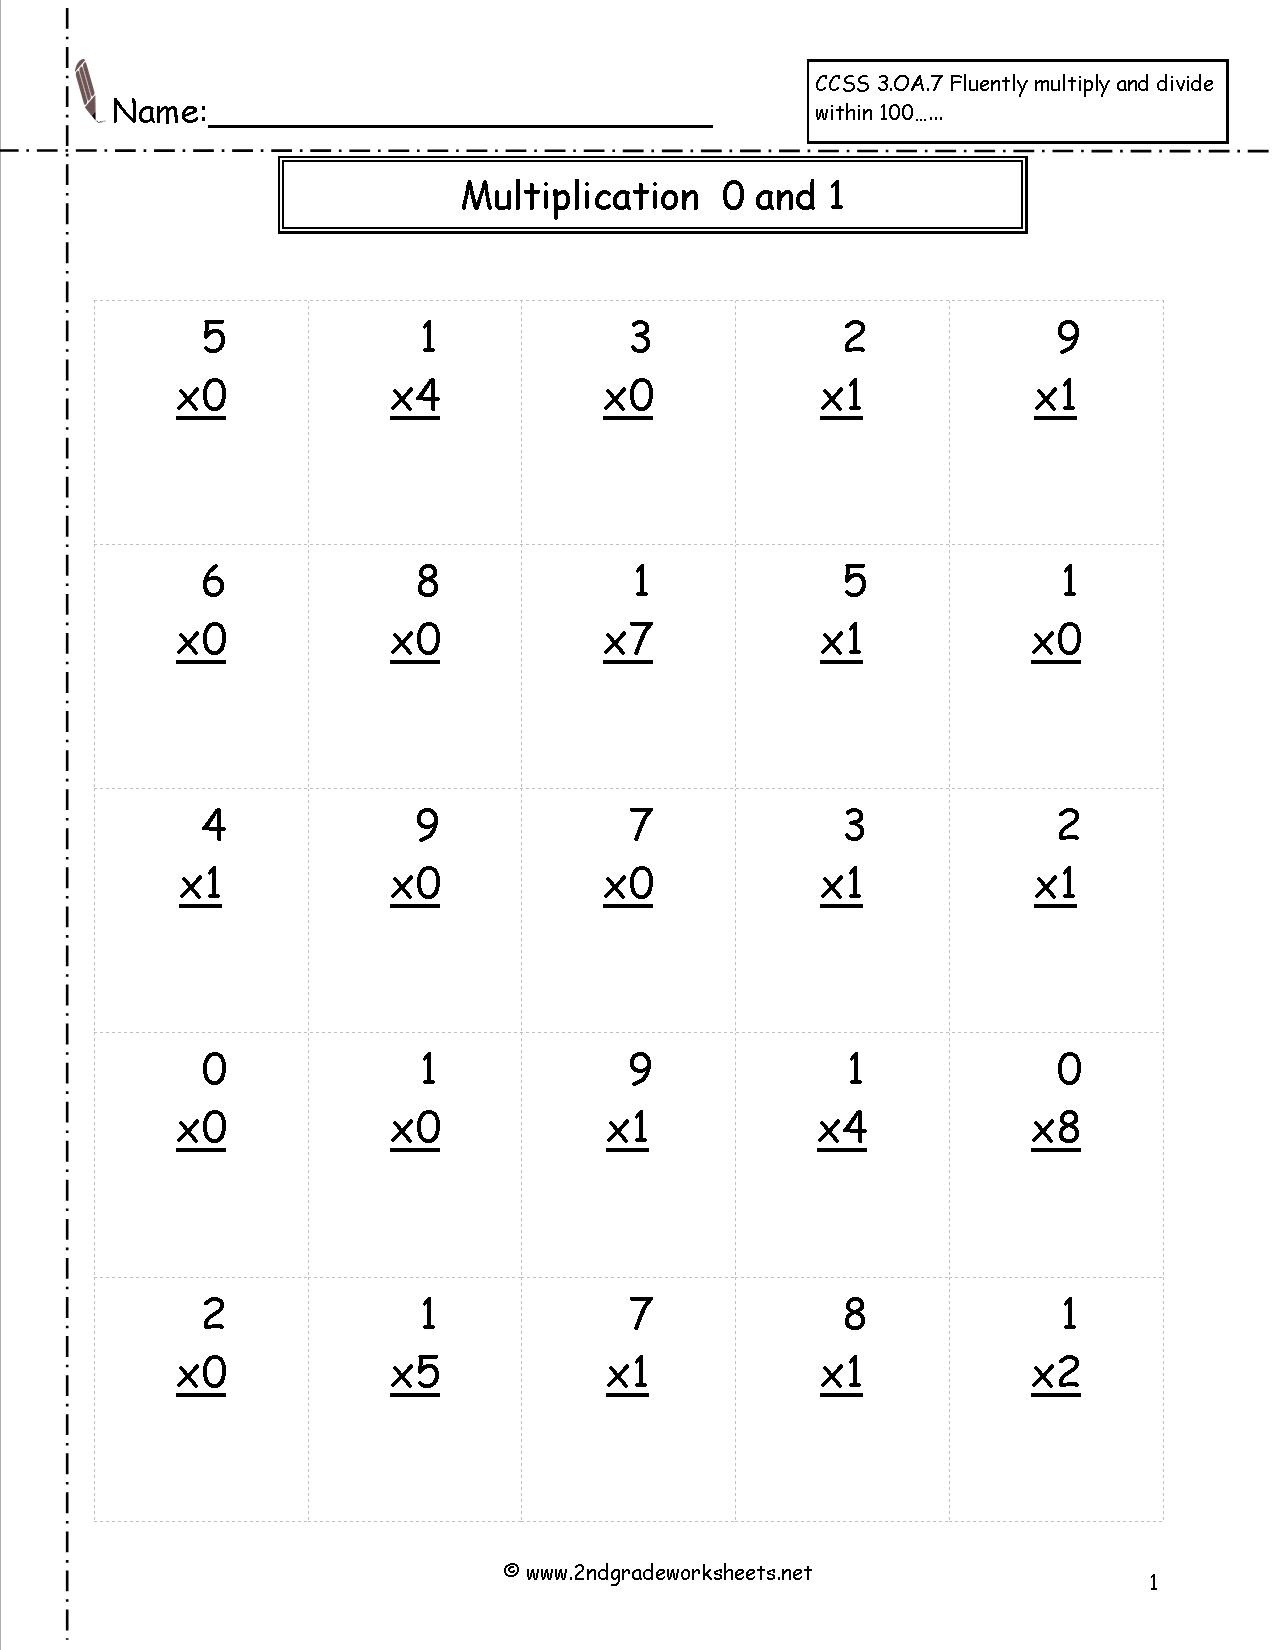 Multiplication Worksheets And Printouts - Free Printable Multiplication Sheets